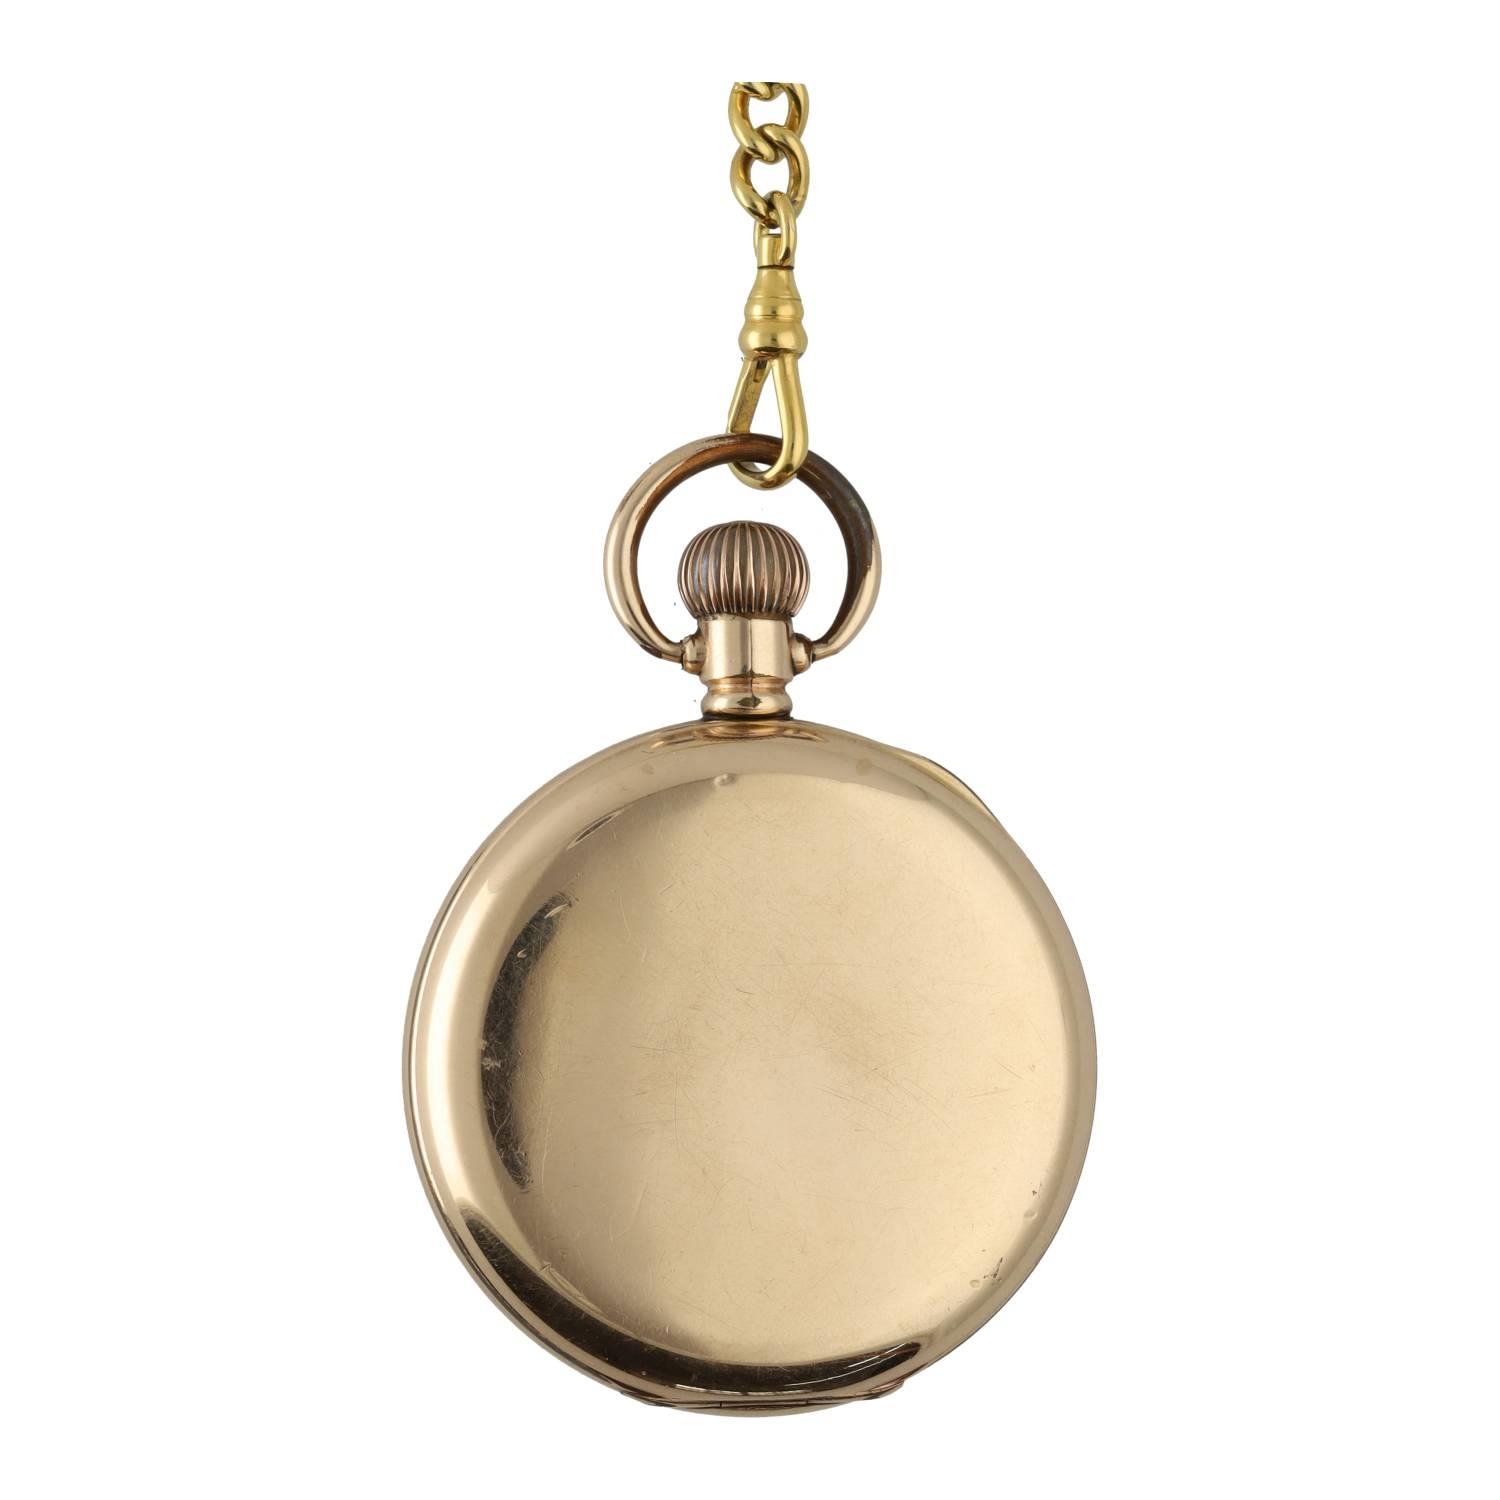 American Waltham gold plated half hunter lever pocket watch, circa 1908, serial no. 1749278, - Image 5 of 5